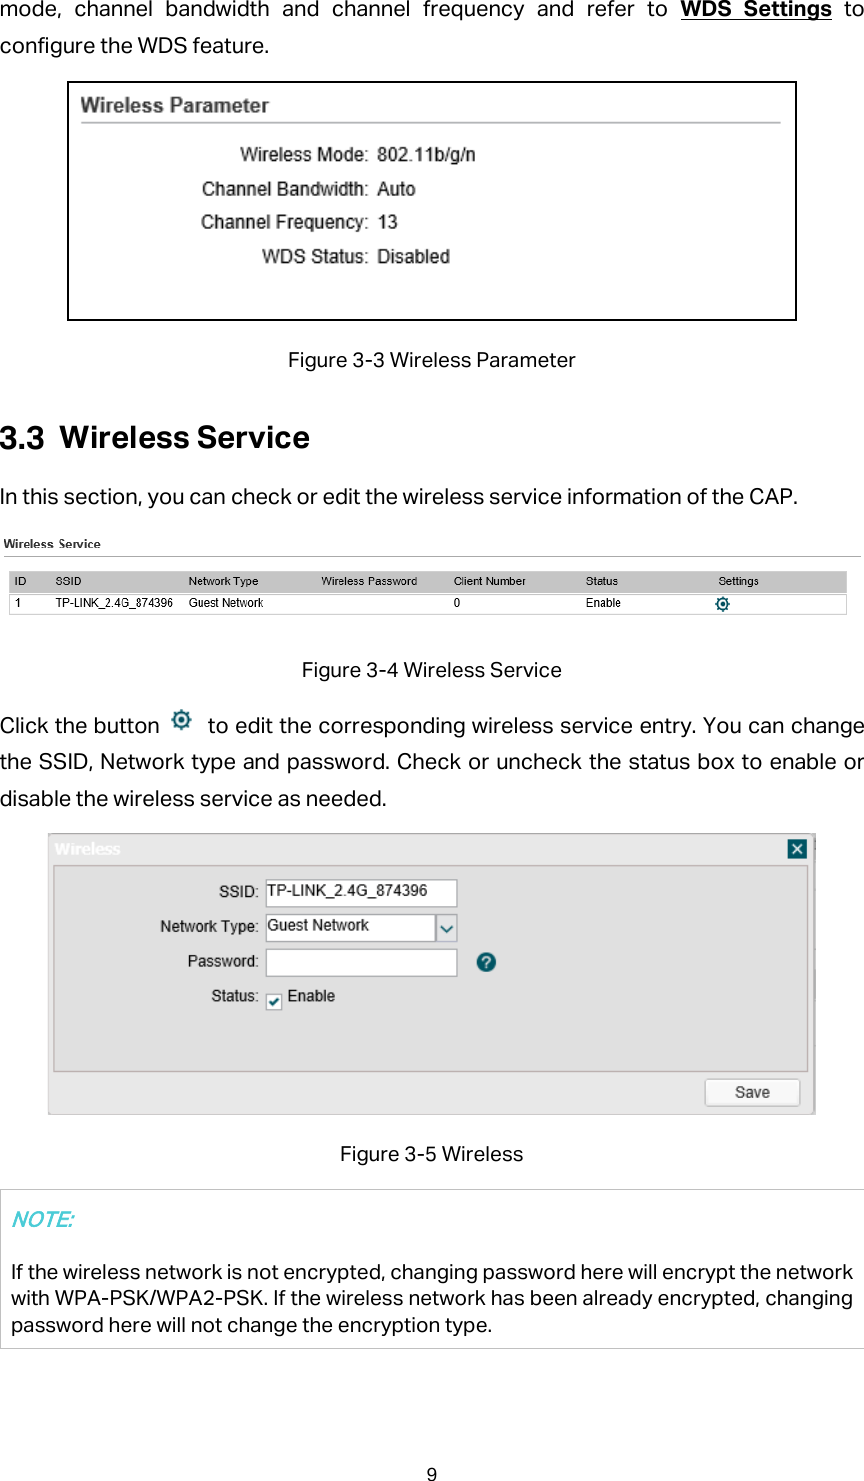 mode, channel bandwidth and channel frequency and refer to WDS Settings to configure the WDS feature.  Figure 3-3 Wireless Parameter  Wireless Service In this section, you can check or edit the wireless service information of the CAP.    Figure 3-4 Wireless Service Click the button    to edit the corresponding wireless service entry. You can change the SSID, Network type and password. Check or uncheck the status box to enable or disable the wireless service as needed.  Figure 3-5 Wireless NOTE: If the wireless network is not encrypted, changing password here will encrypt the network with WPA-PSK/WPA2-PSK. If the wireless network has been already encrypted, changing password here will not change the encryption type. 9 